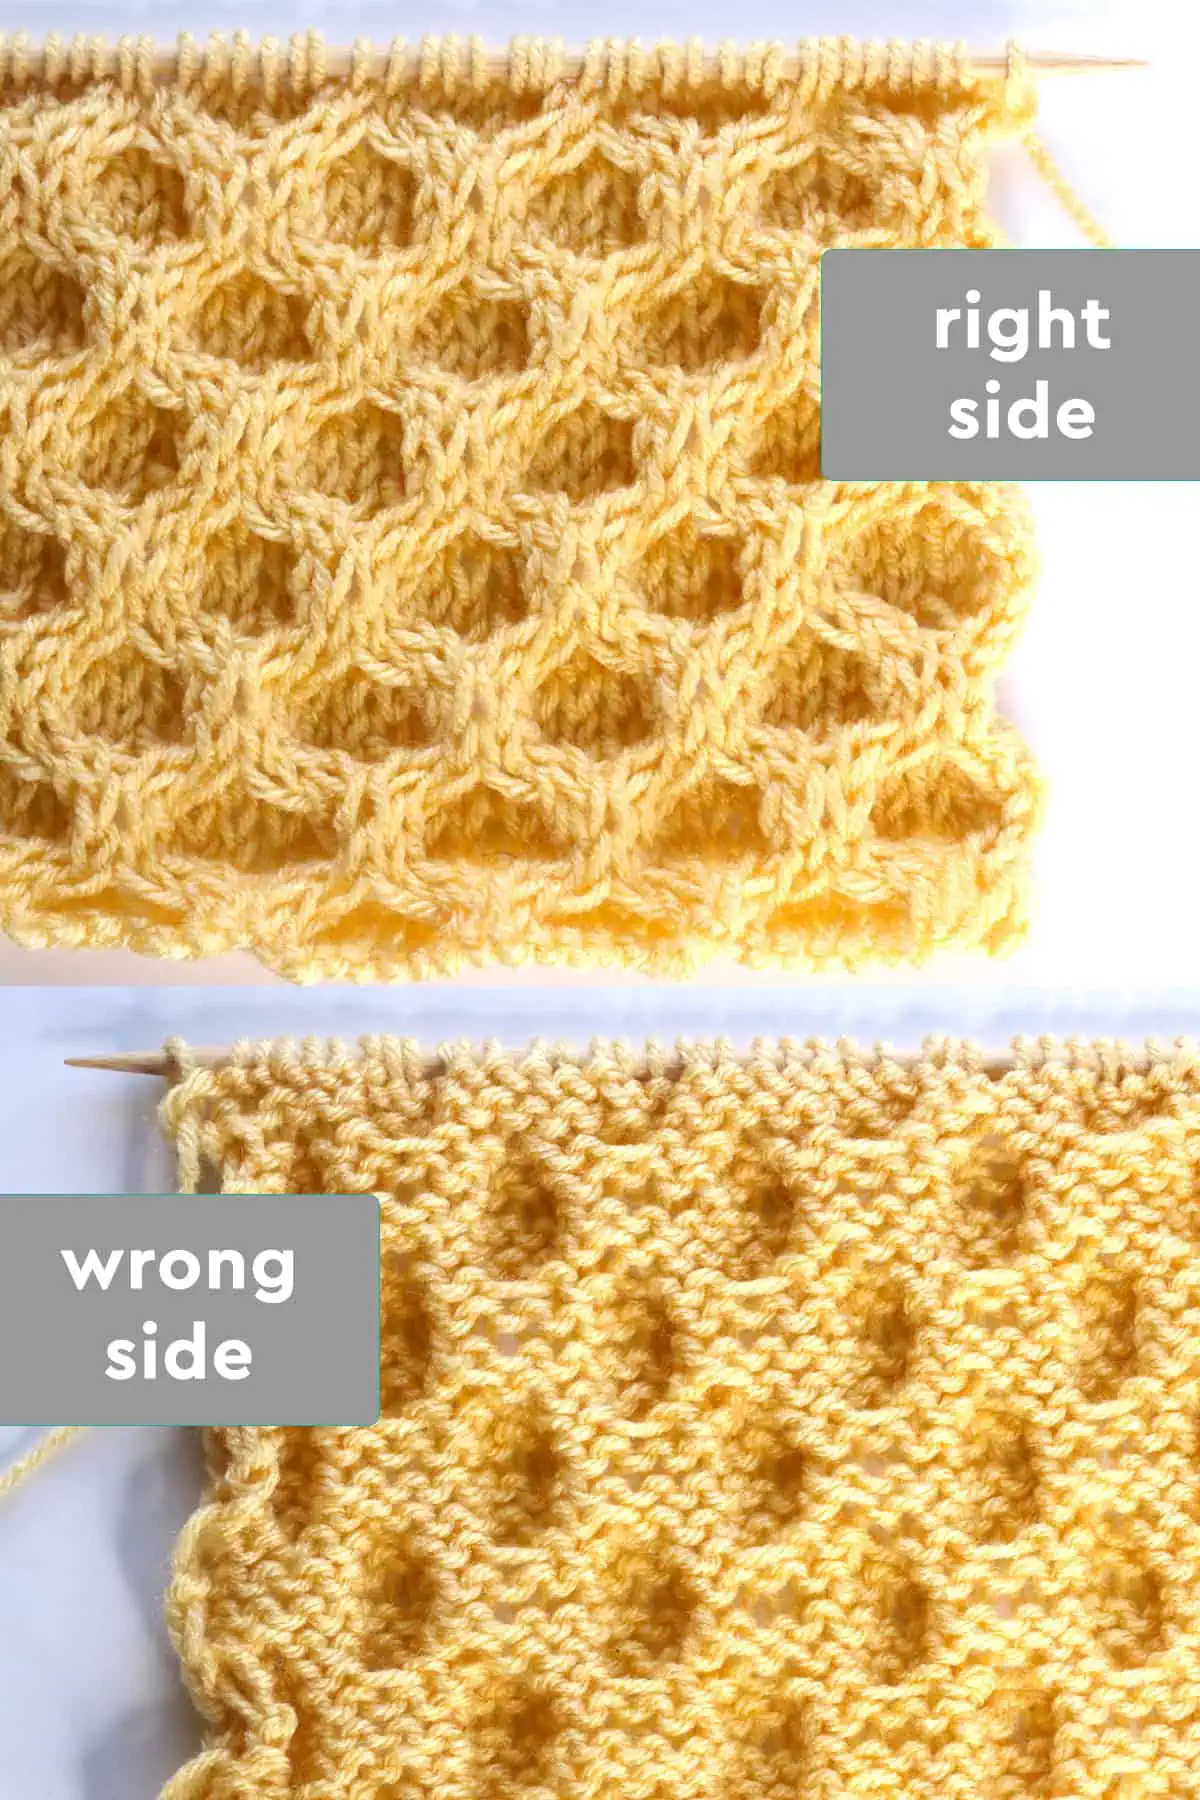 Right and wrong sides of the Honeycomb Knit Stitch pattern on knitting needles in yellow-colored yarn.